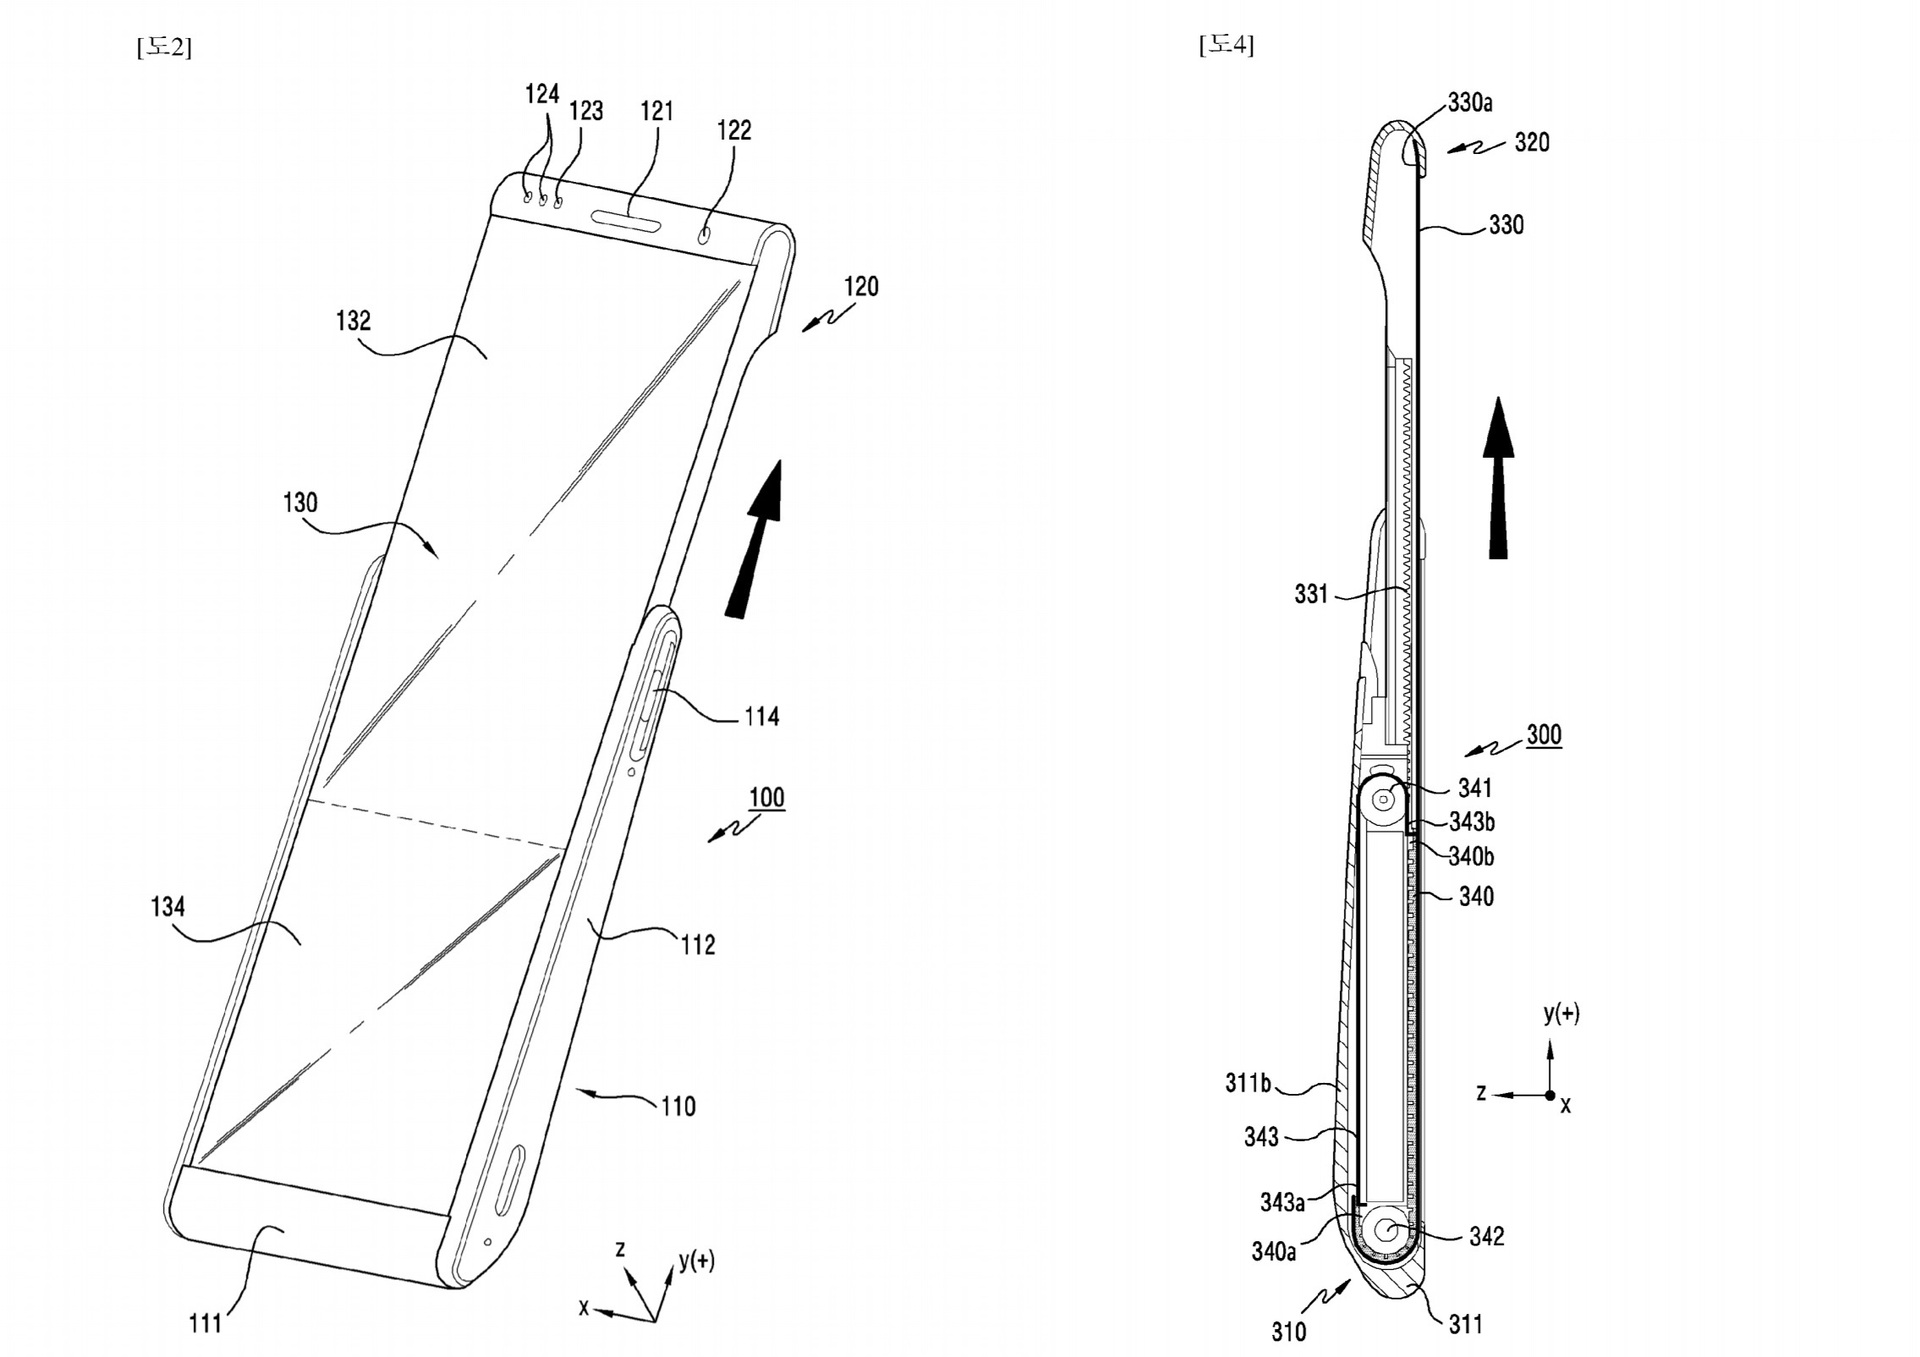 Samsung Galaxy rolling phone patent images showing two designs.